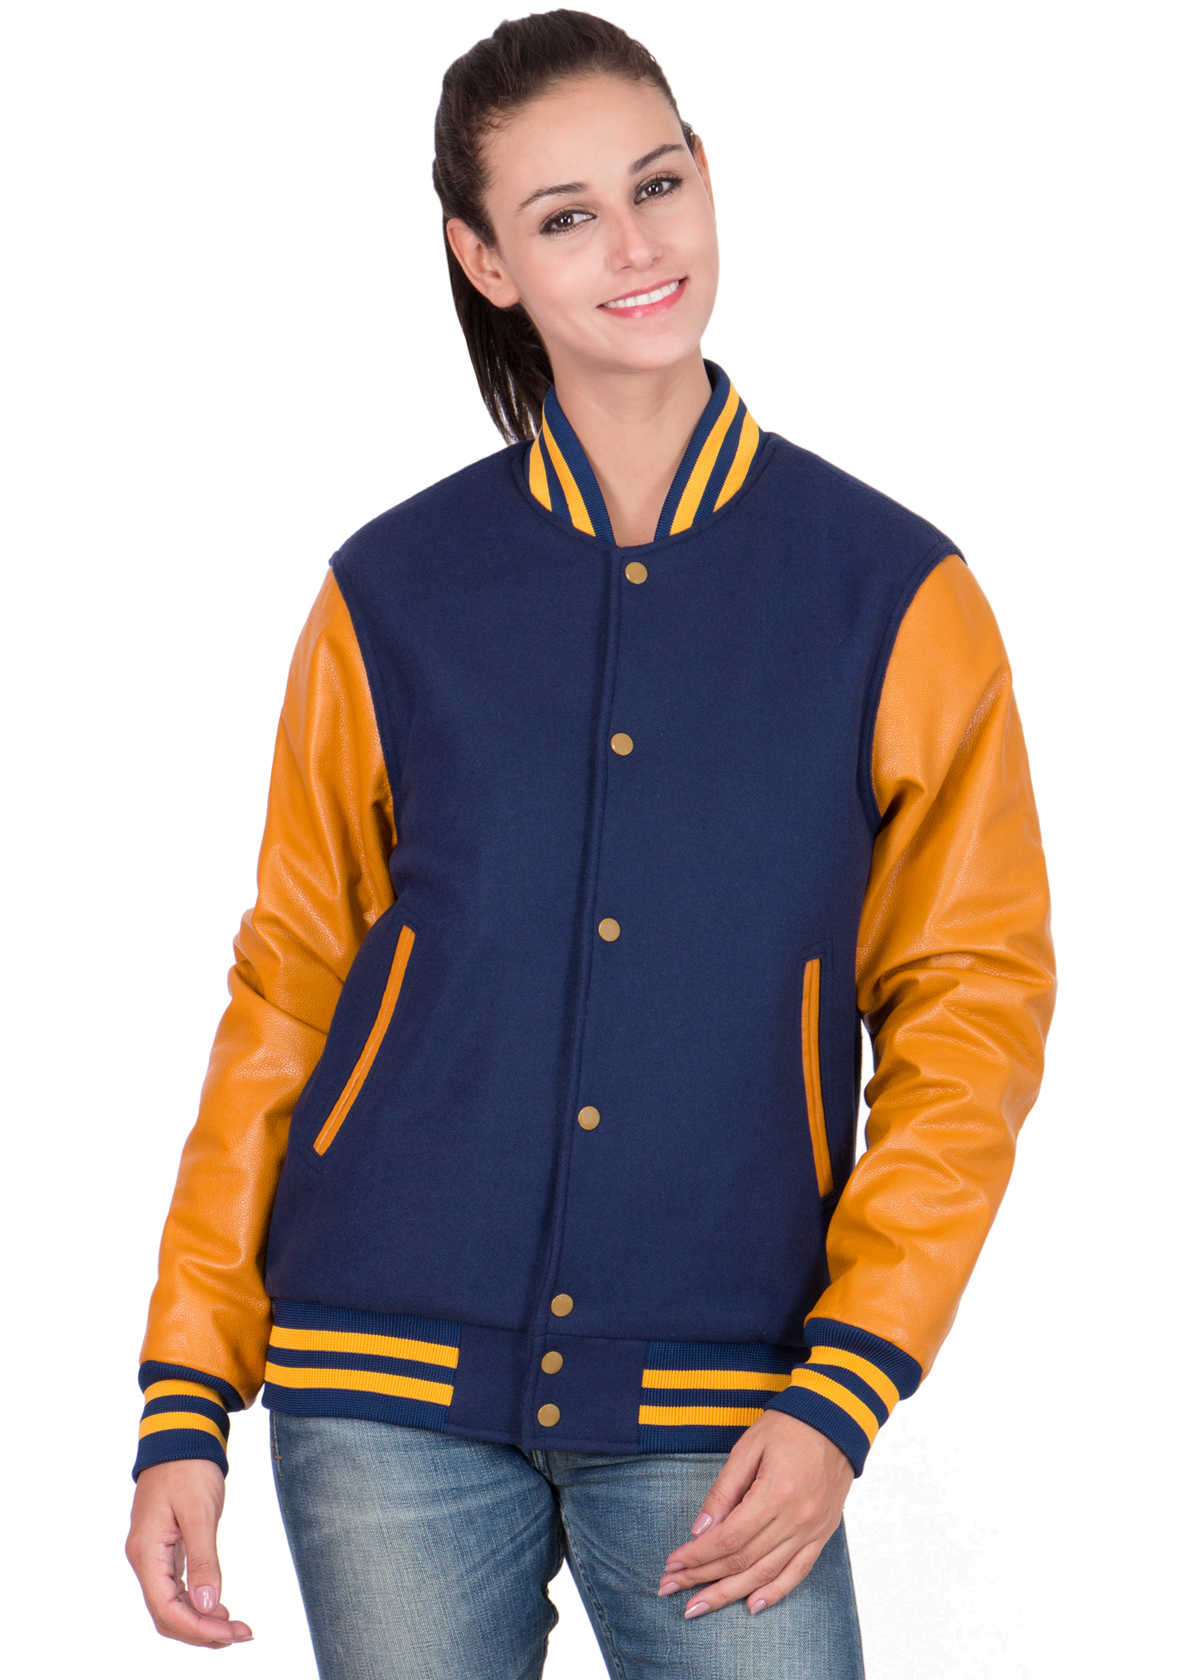 Kelly Green Letterman Jacket with Gold Leather Sleeves